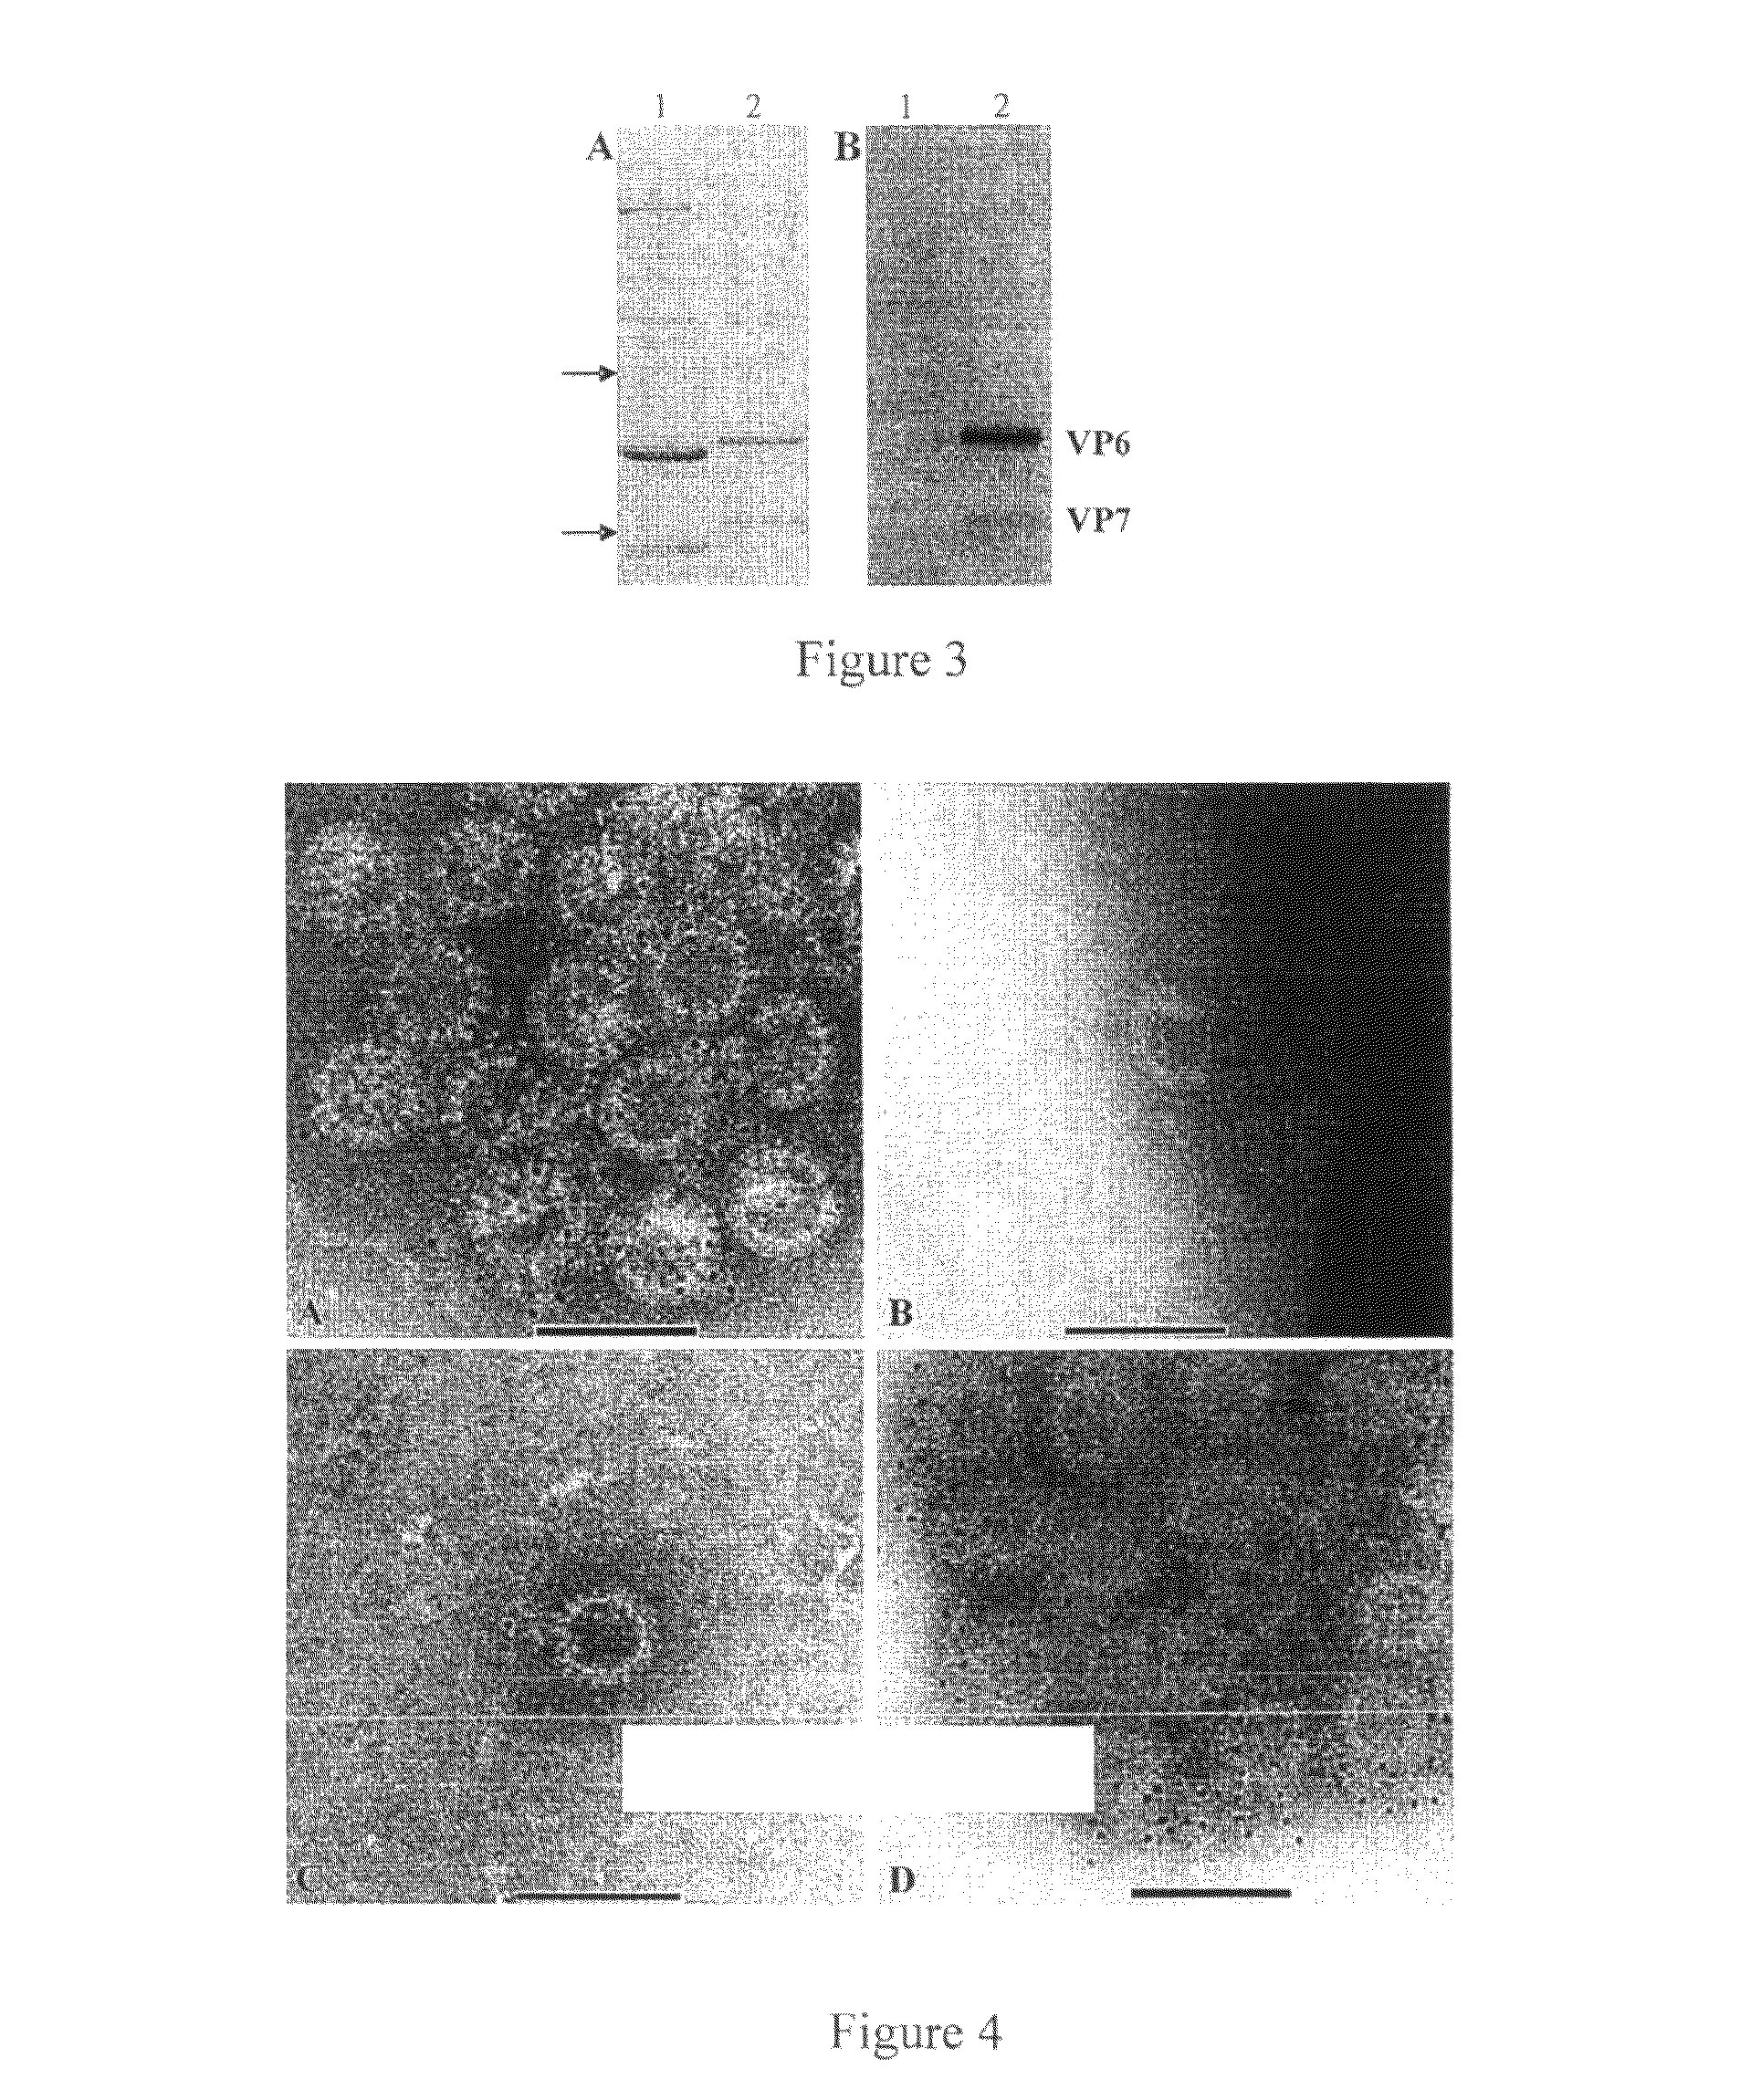 Expression and assembly of human group C rotavirus-like particles and uses thereof